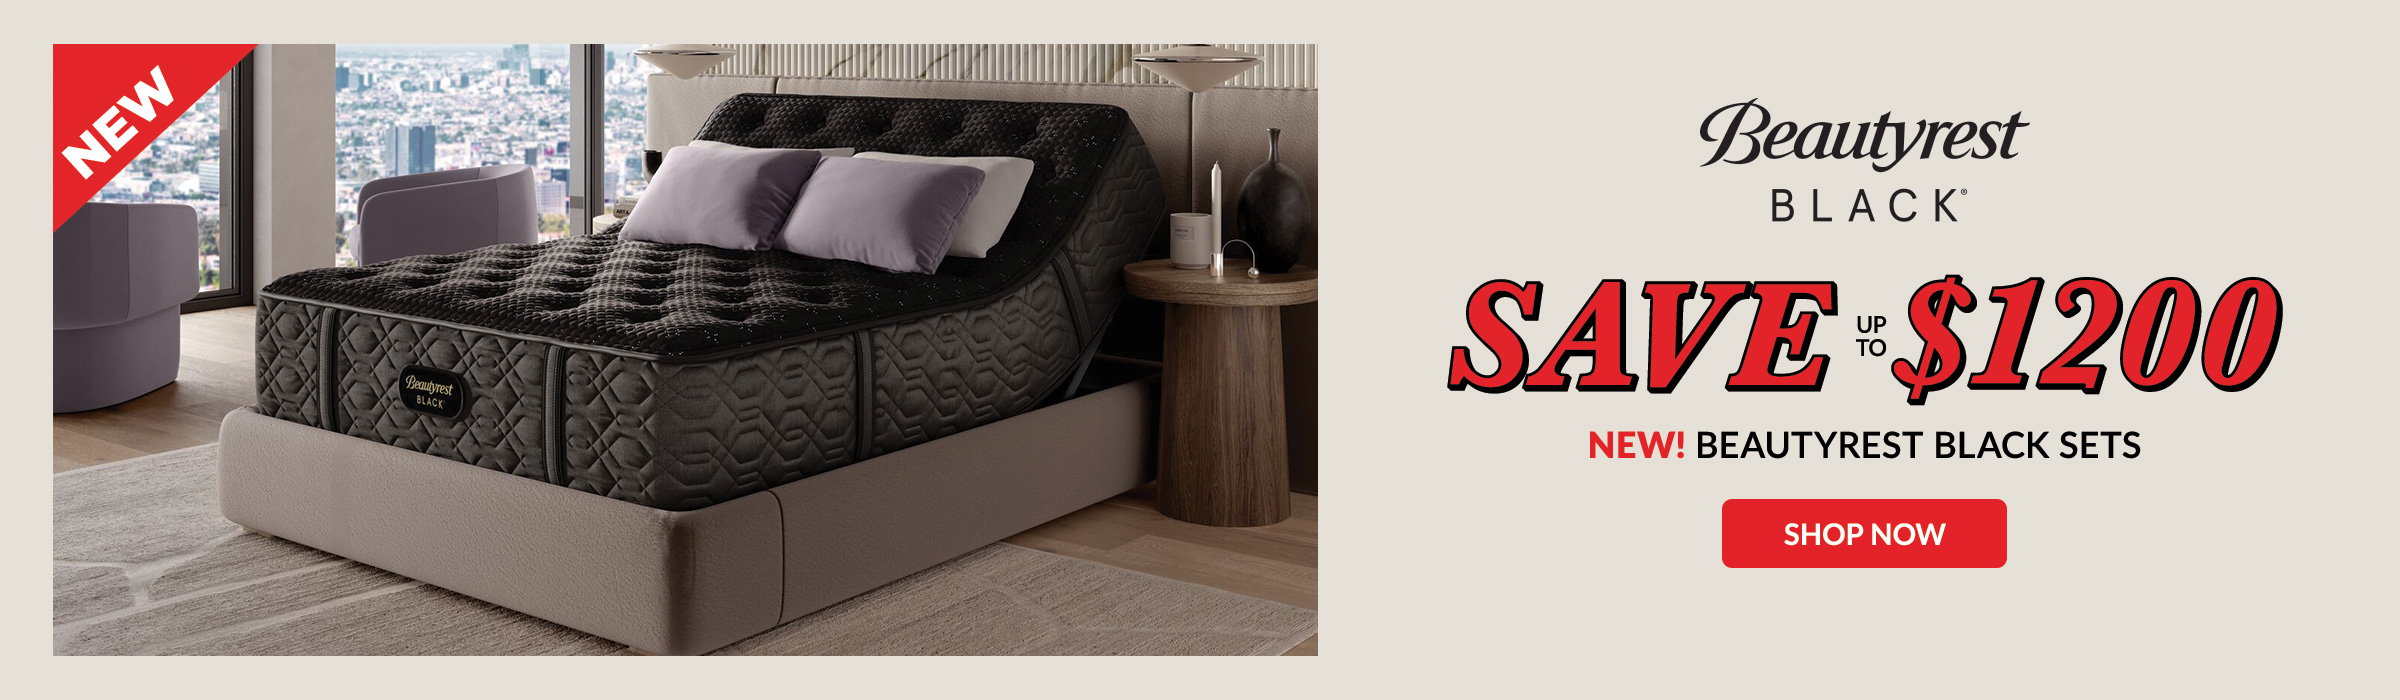 Save up to $1200 on New Beautyrest Black Sets